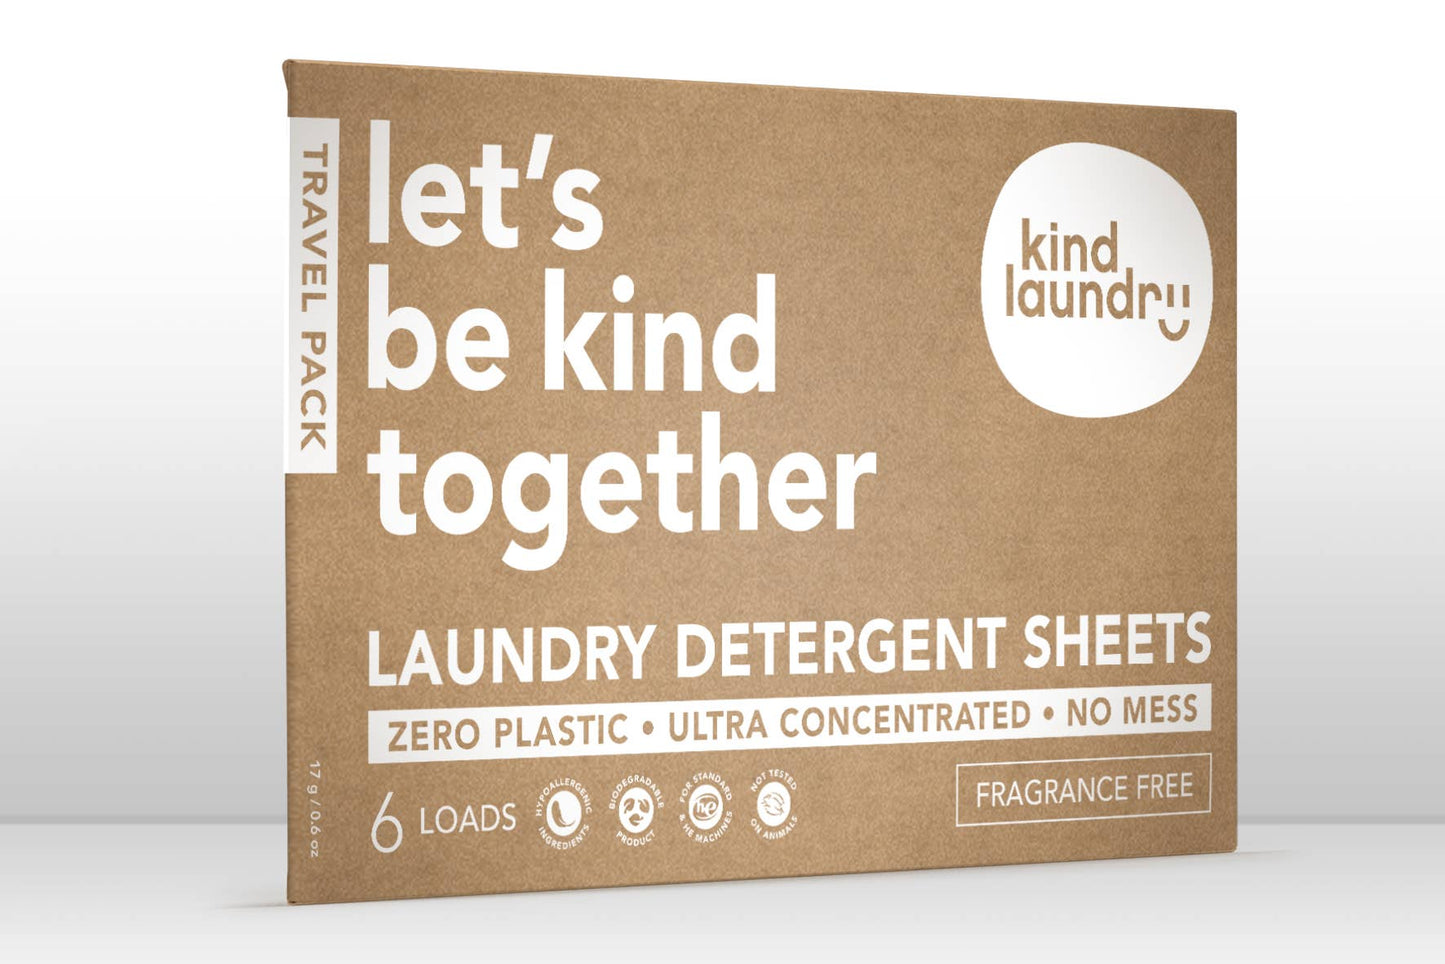 Kind Laundry - Laundry Detergent Sheets Travel Pack